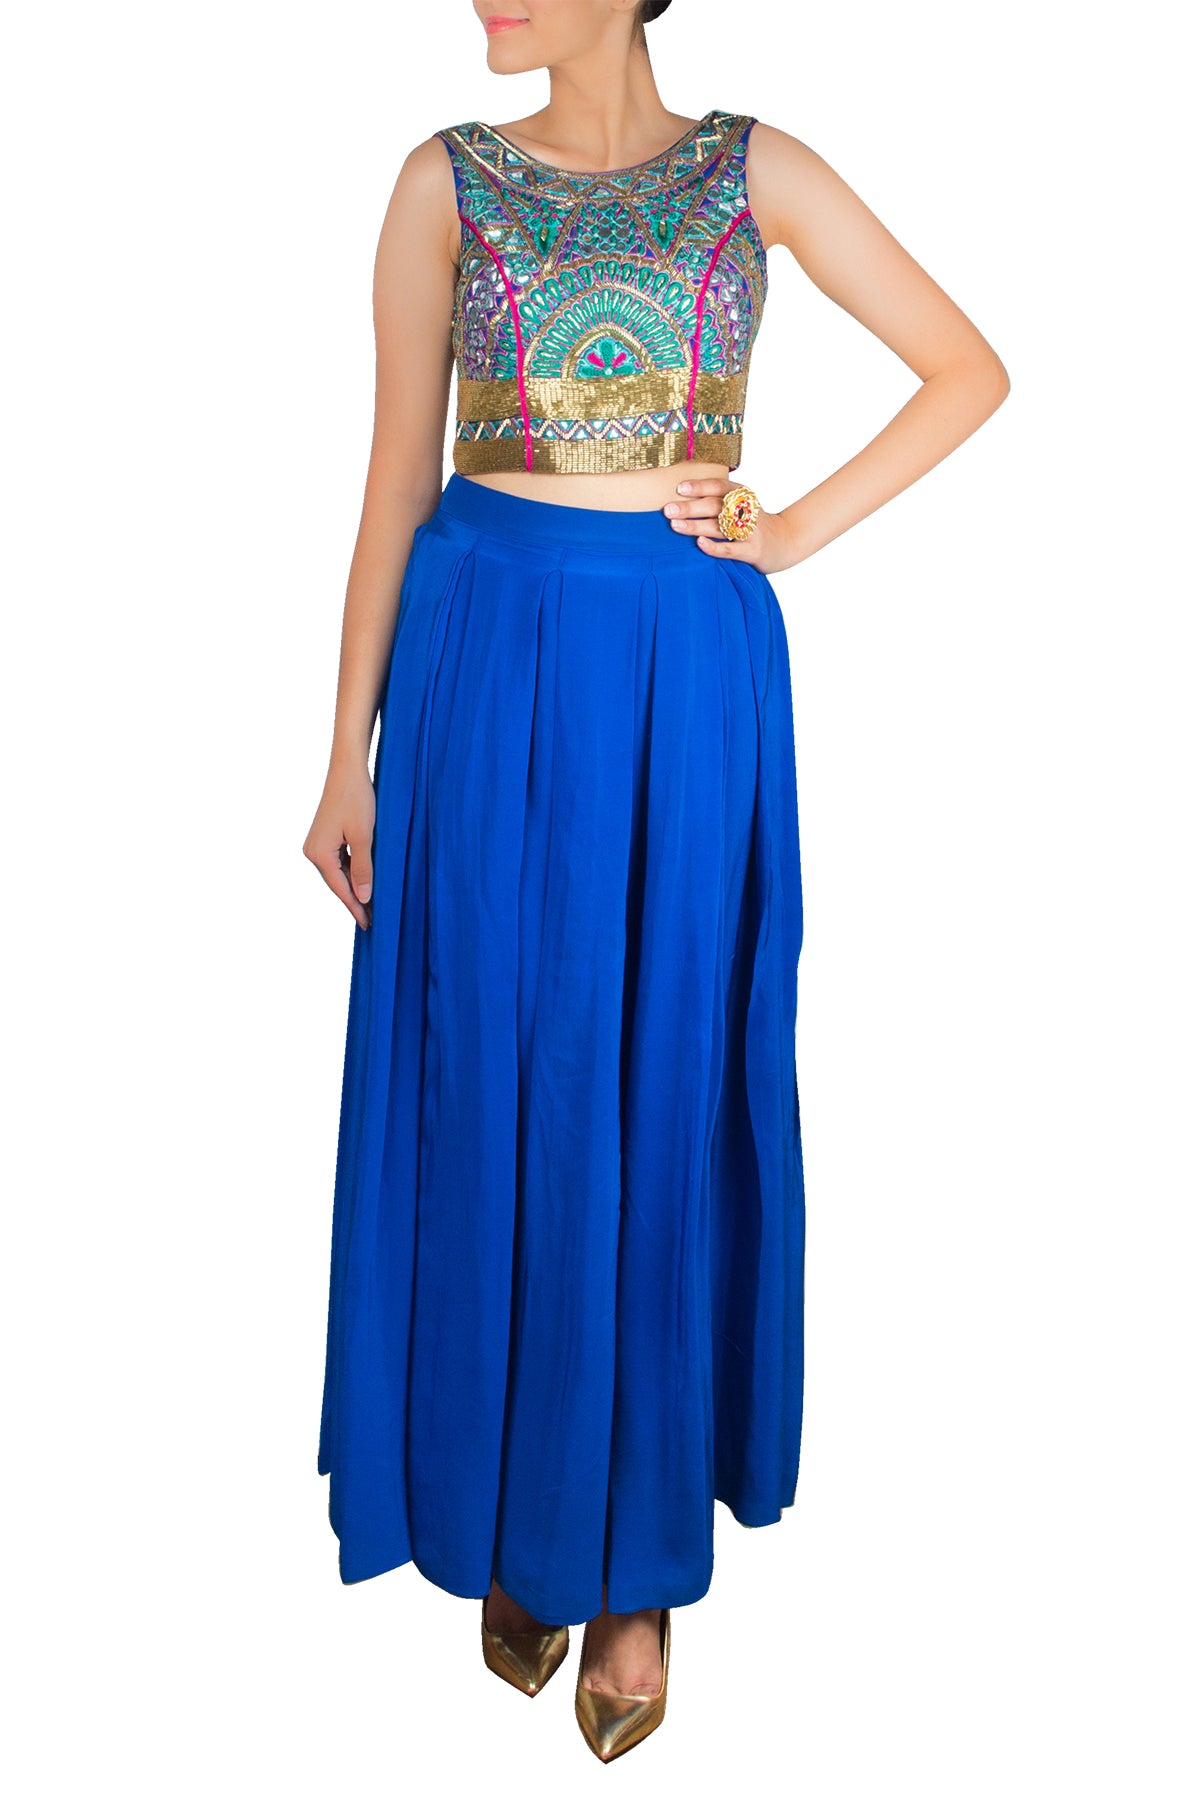 Go colour crazy for a vibrant outdoor function in our embroidered crop top embellished with peacock motiifs over a blue high-waisted crepe skirt with a hot pink lining.